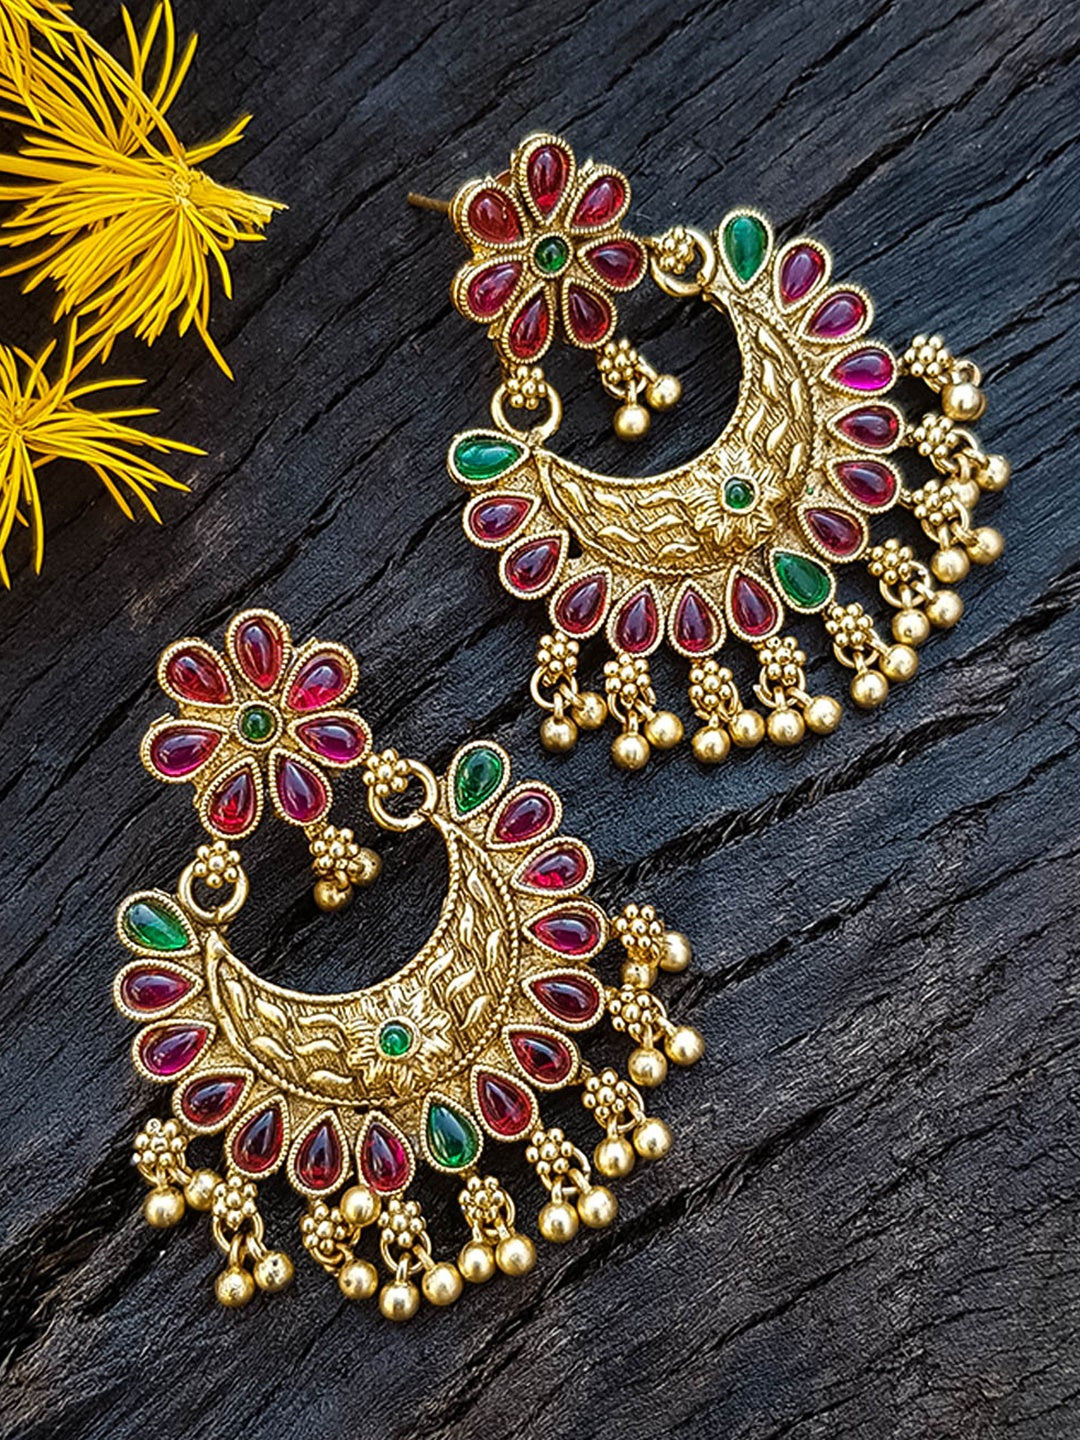 Gold Plated Chandbali hangings / Earrings with AD Stones 13299N